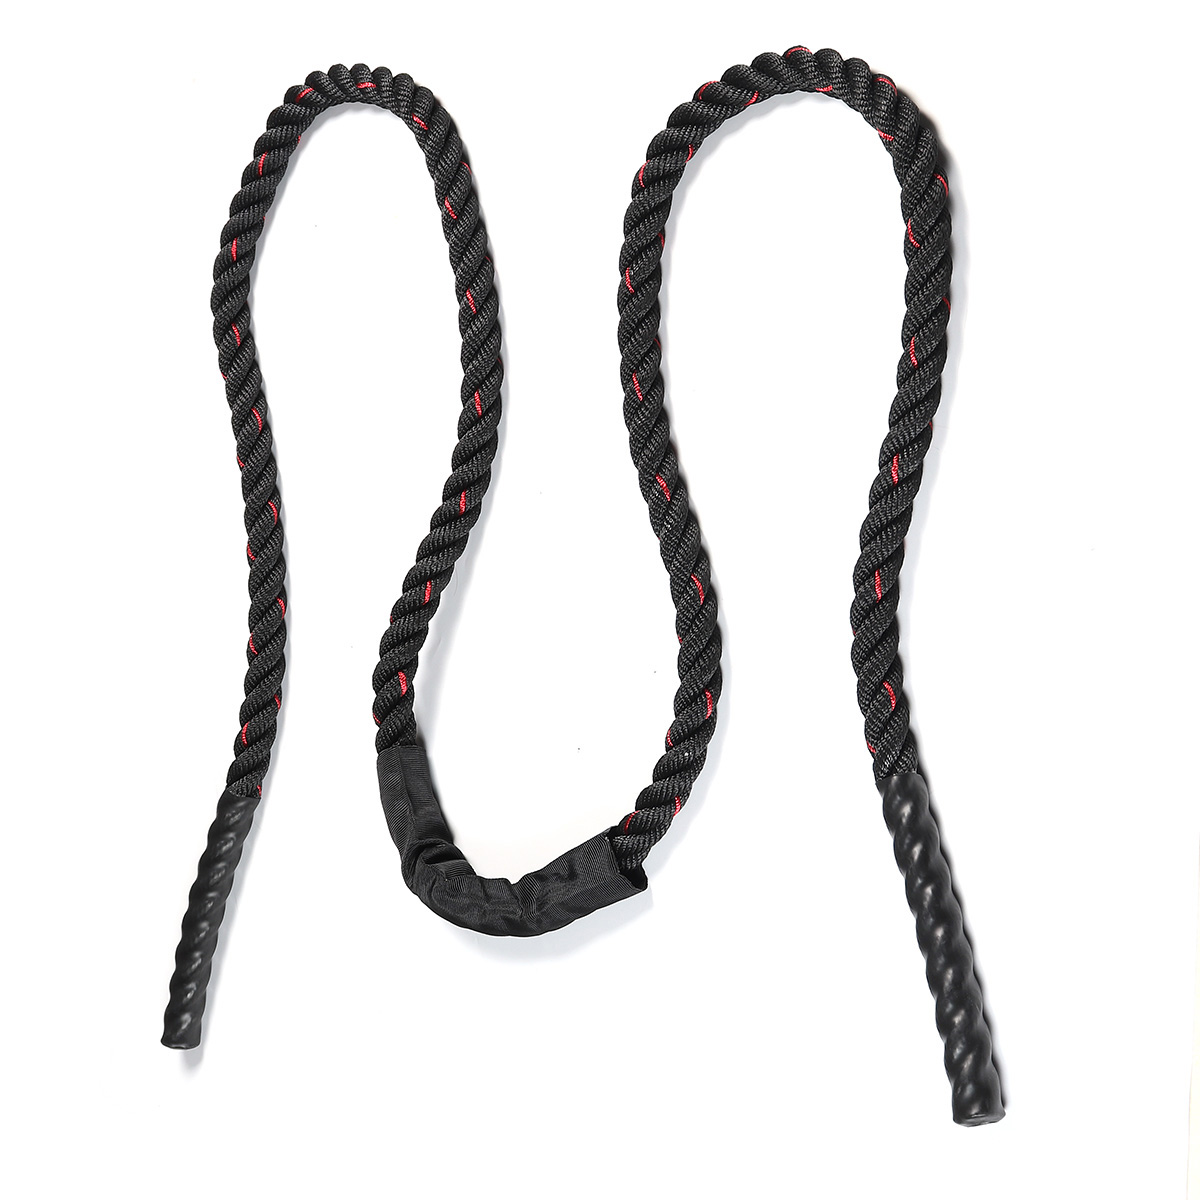 25mm-Heavy-Jump-Rope-Thicken-Weighted-Training-Battle-Skipping-Ropes-Muscle-Power-Training-Gym-Fitne-1706587-6